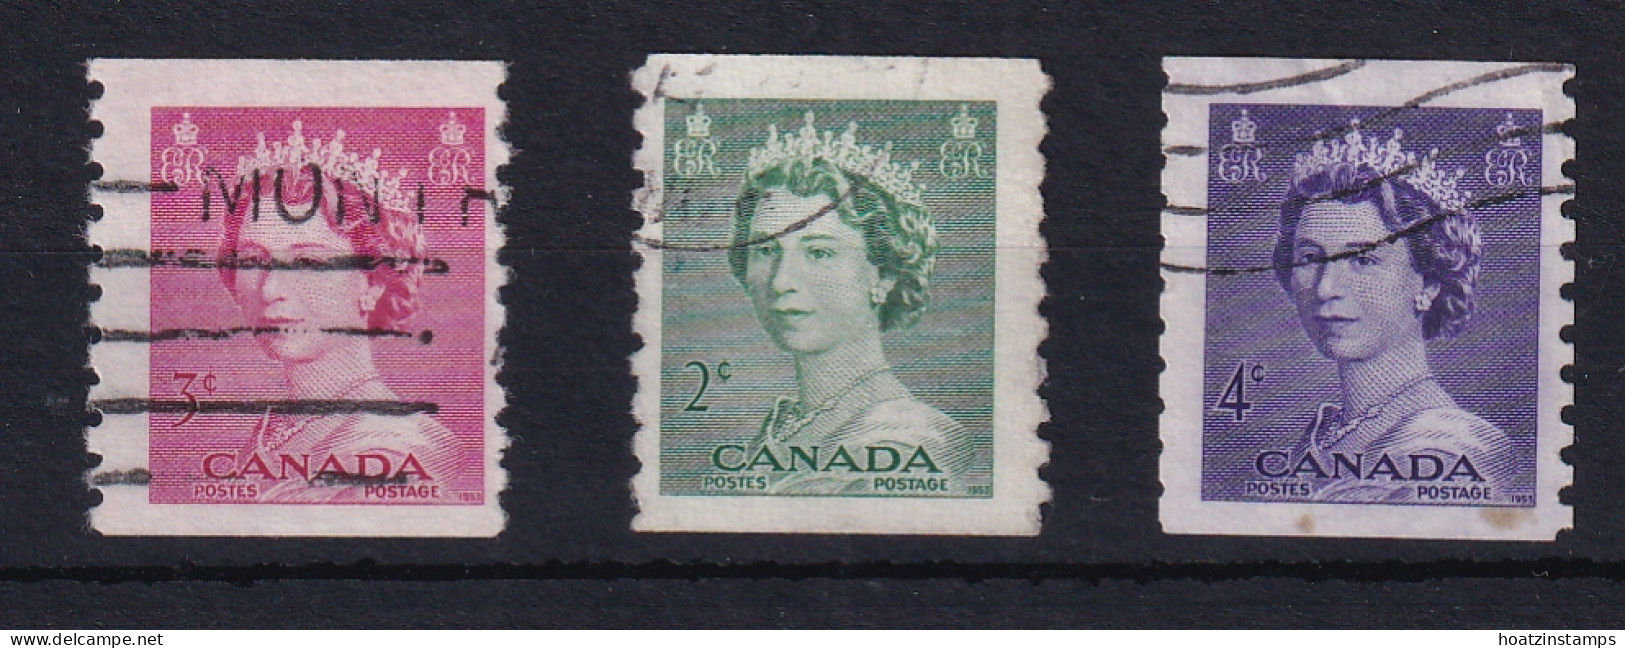 Canada: 1953   QE II - Coil Stamps Set   SG455-457  [Imperf X 9½]   Used - Usados